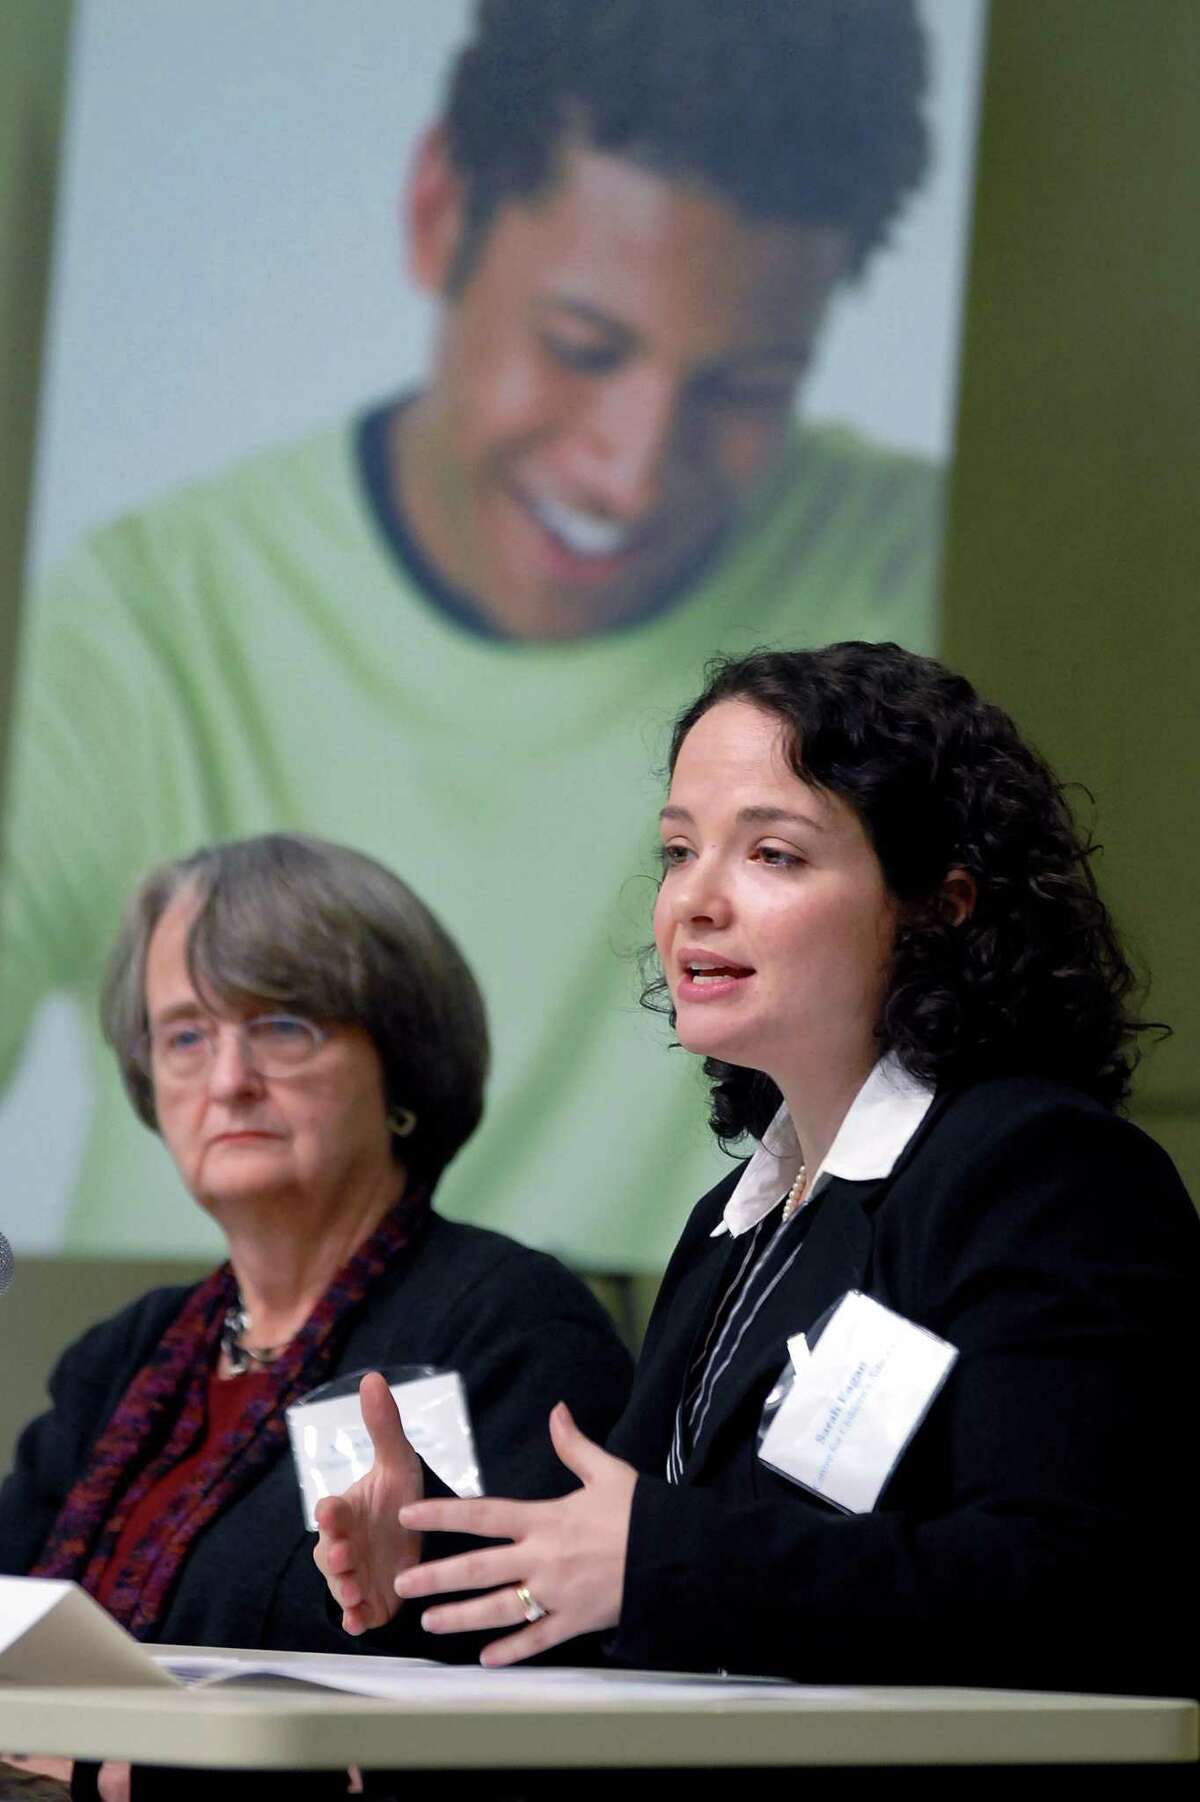 State Child Advocate Sarah H. Eagan, right, in a file photo.